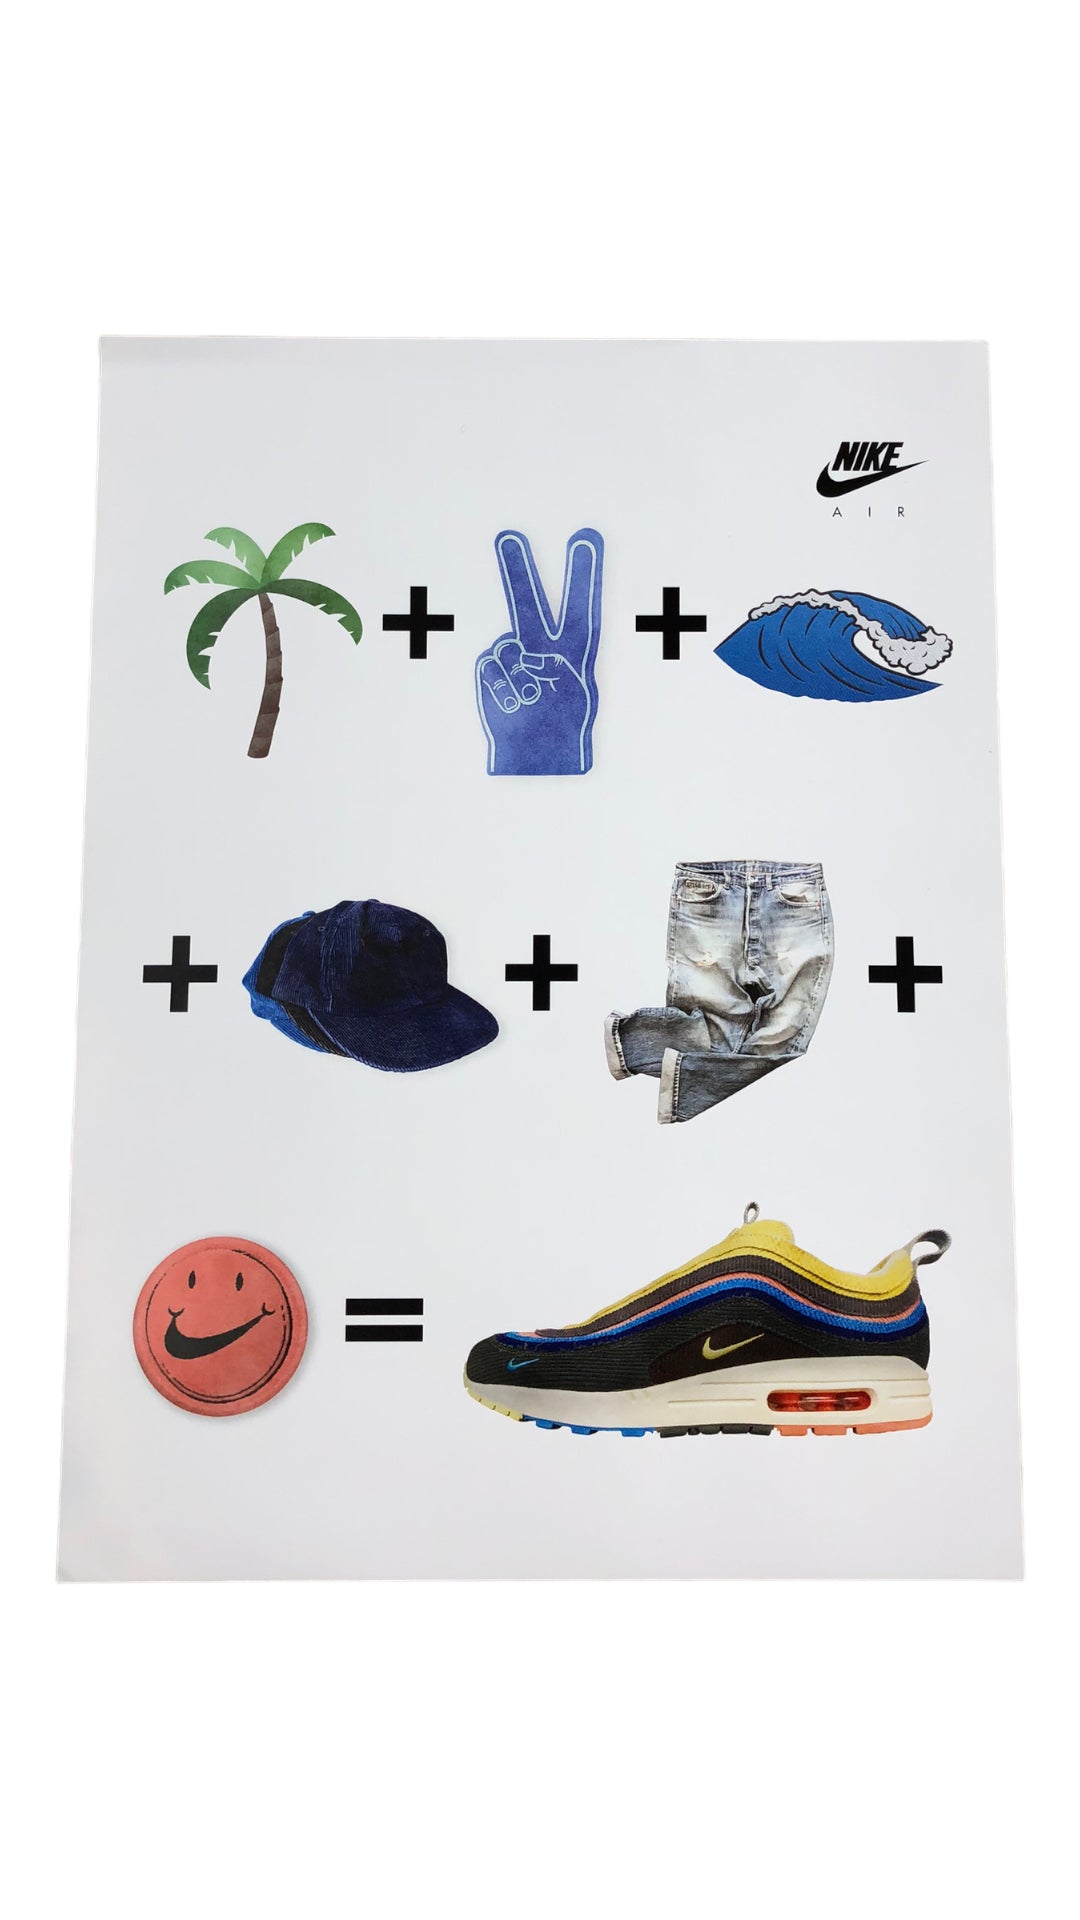 Official Nike Sean WotherSpoon 97/1 Promo 18x24 Poster